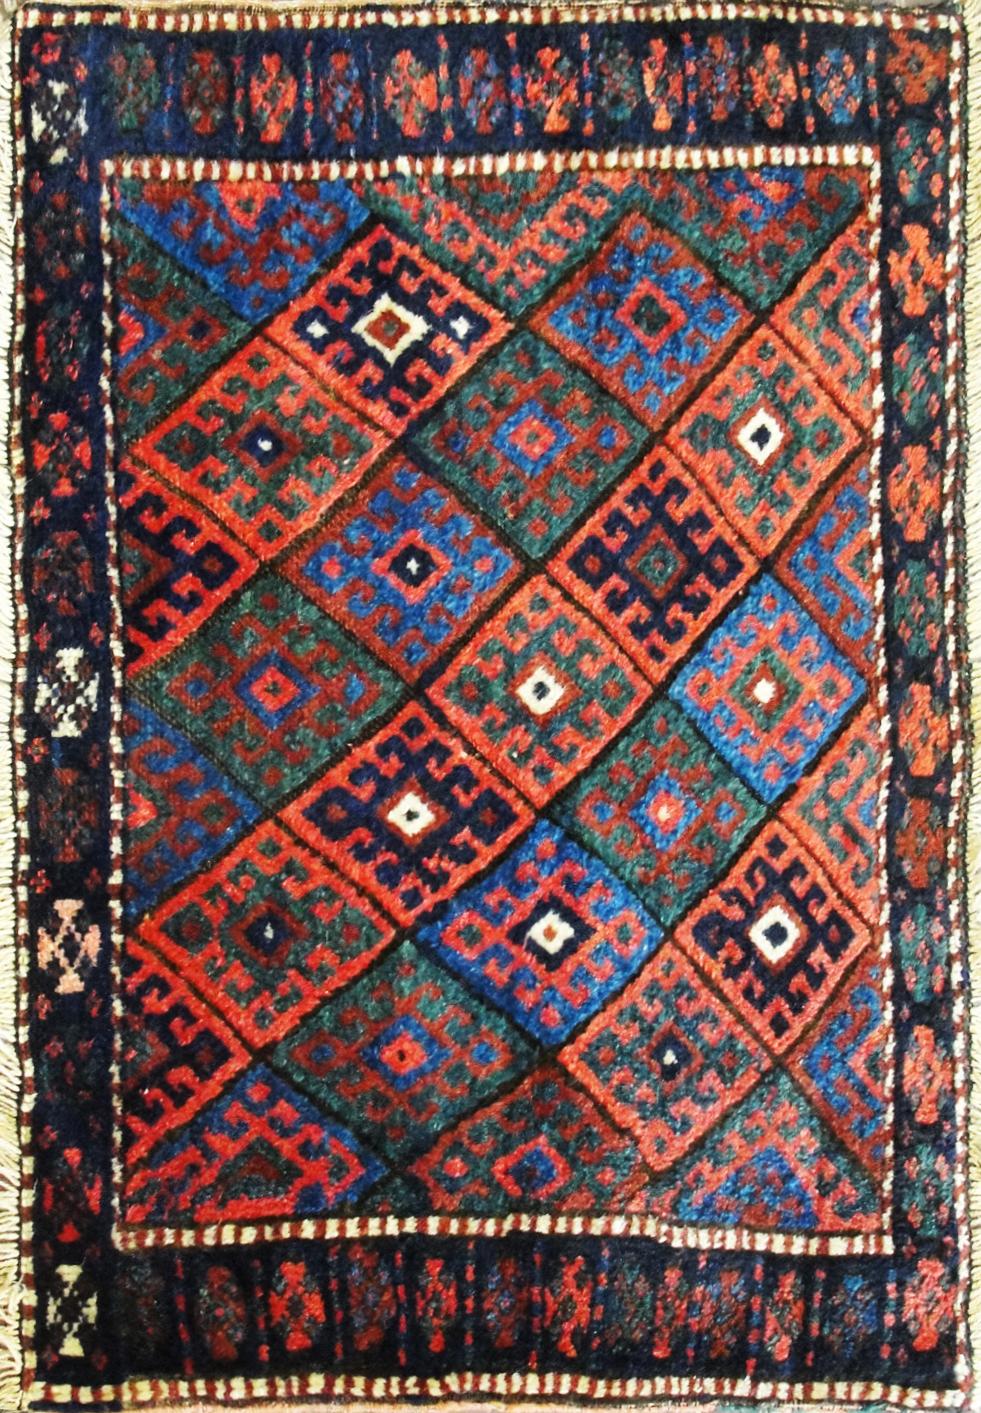 Irresistible Color Antique Tribal Kurdish Rug/Bag Jaff c-1900's, 2' x 3'.
This is an authentic handmade rug bringing a primitive feel to the room. It was made in Kurdish town circa 1900s or before. The Kurdish tribes create fascinating Persian rugs